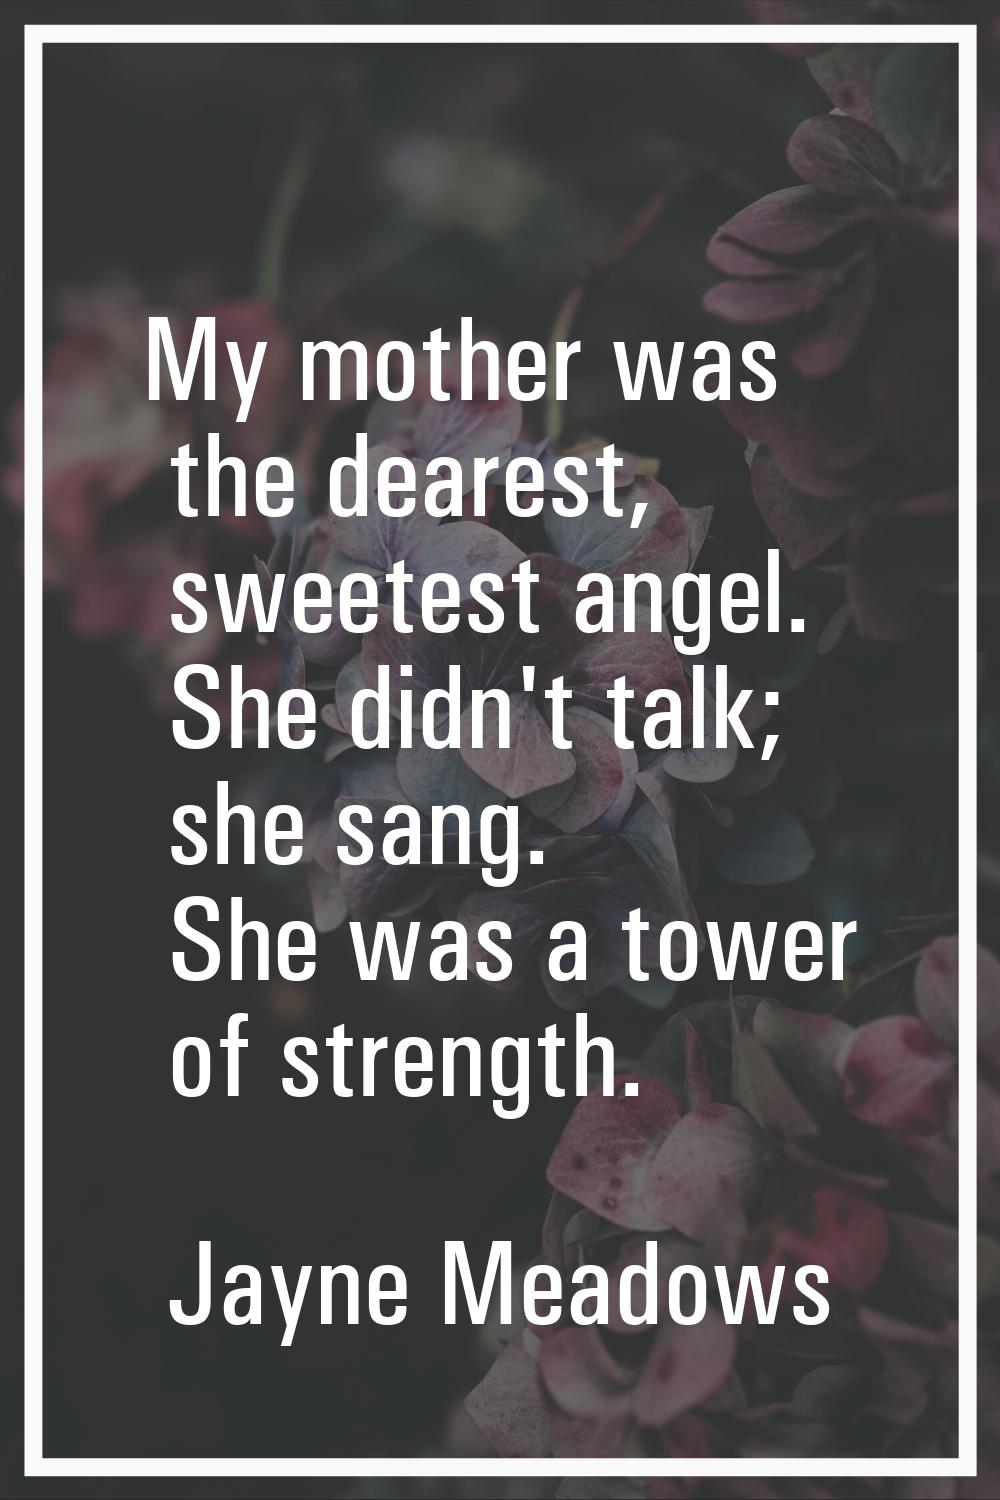 My mother was the dearest, sweetest angel. She didn't talk; she sang. She was a tower of strength.